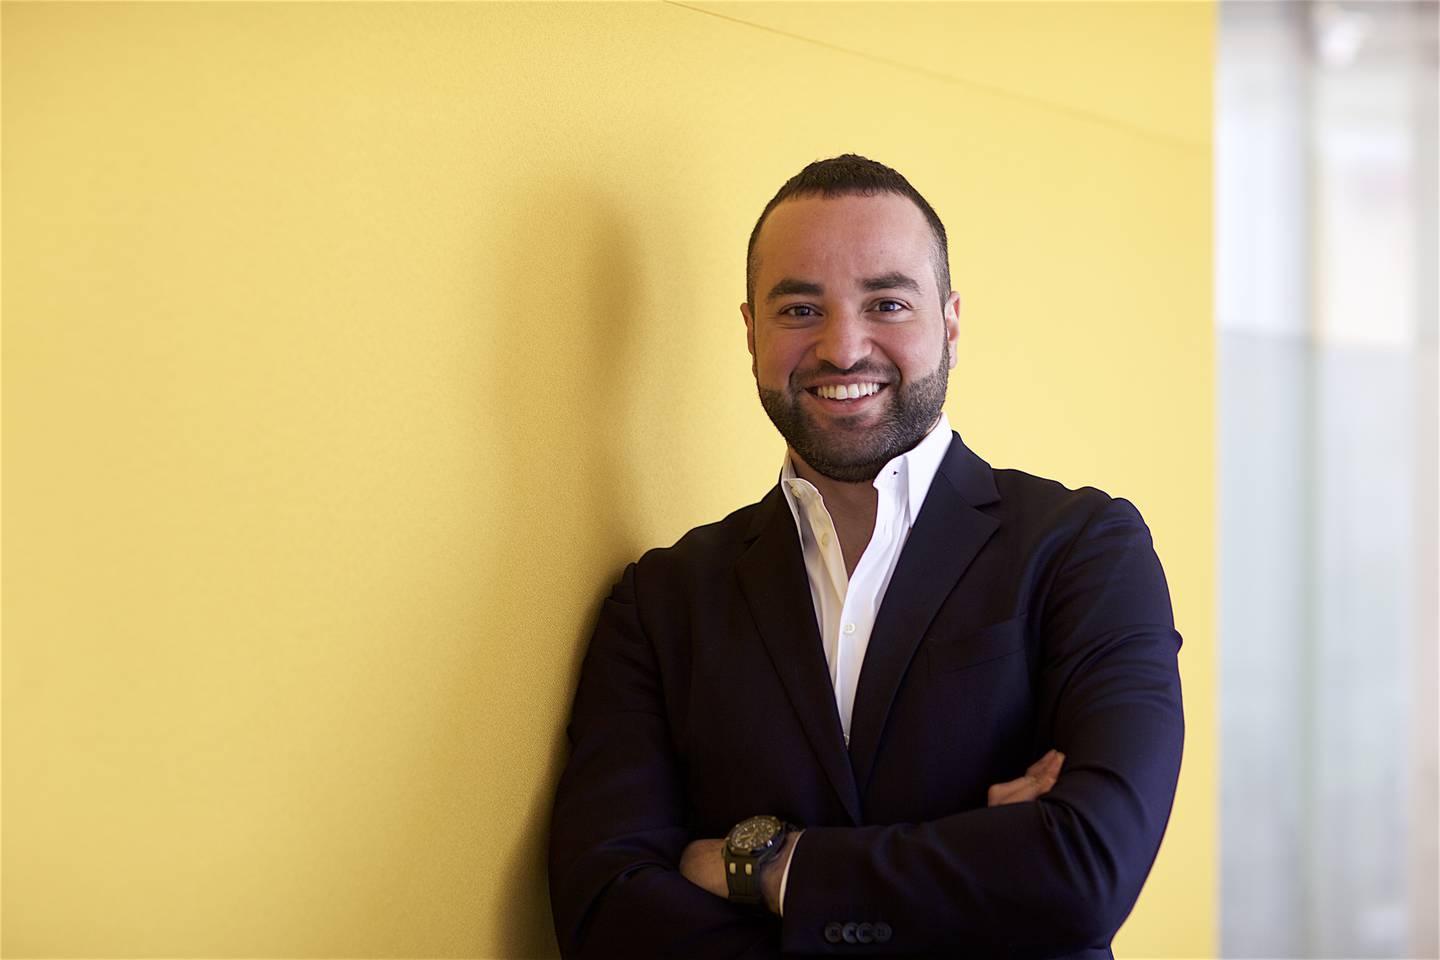 Hussein Freijeh, general manager of Snap in the Middle East and North Africa, says the GCC is one of the most engaged communities for Snapchat globally. Photo: Snap